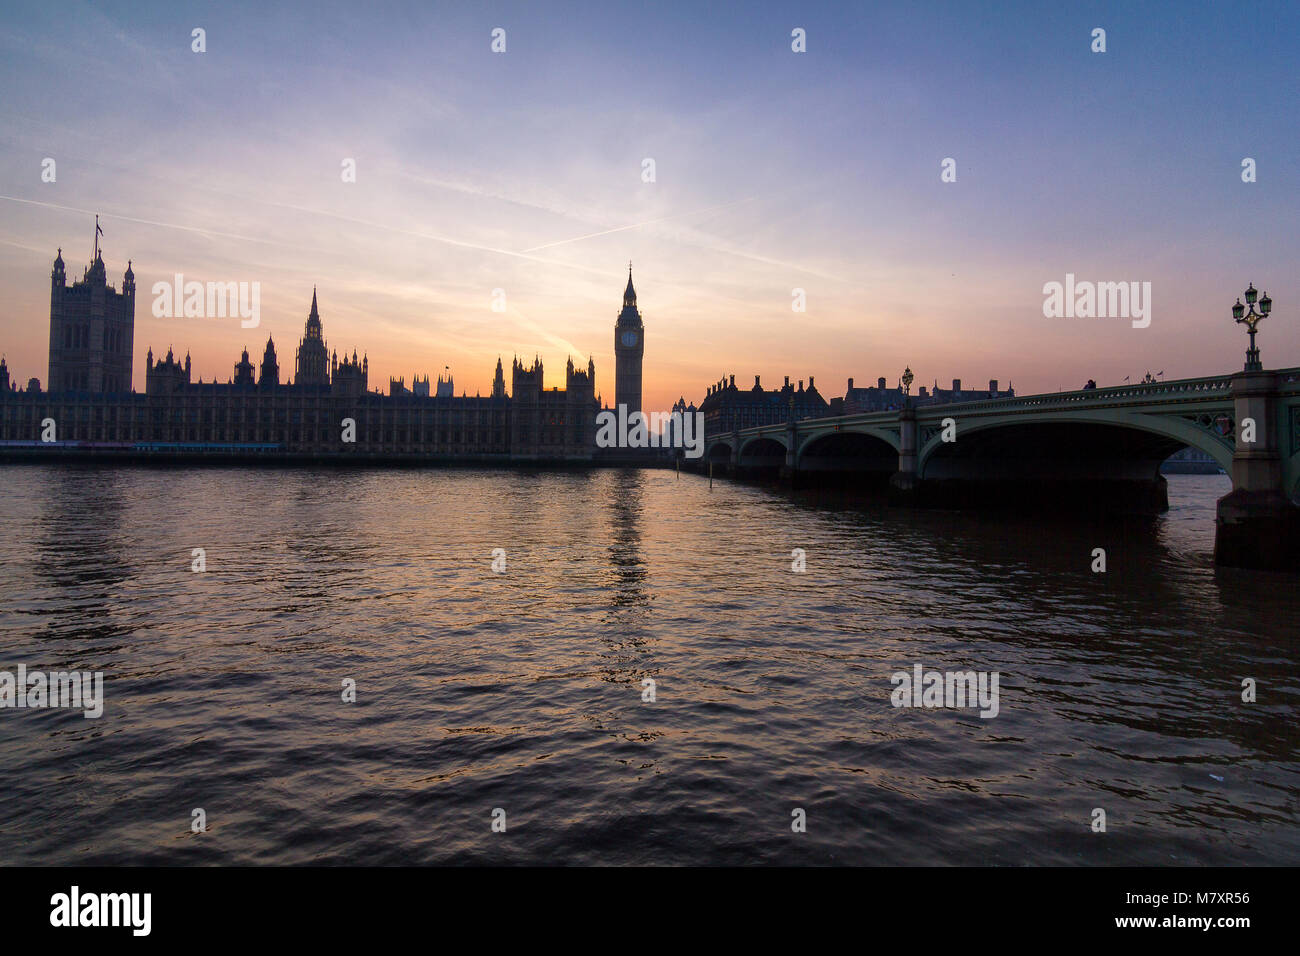 LONDON, UK: Westminster Parliament with Thames in foreground at sunset Stock Photo